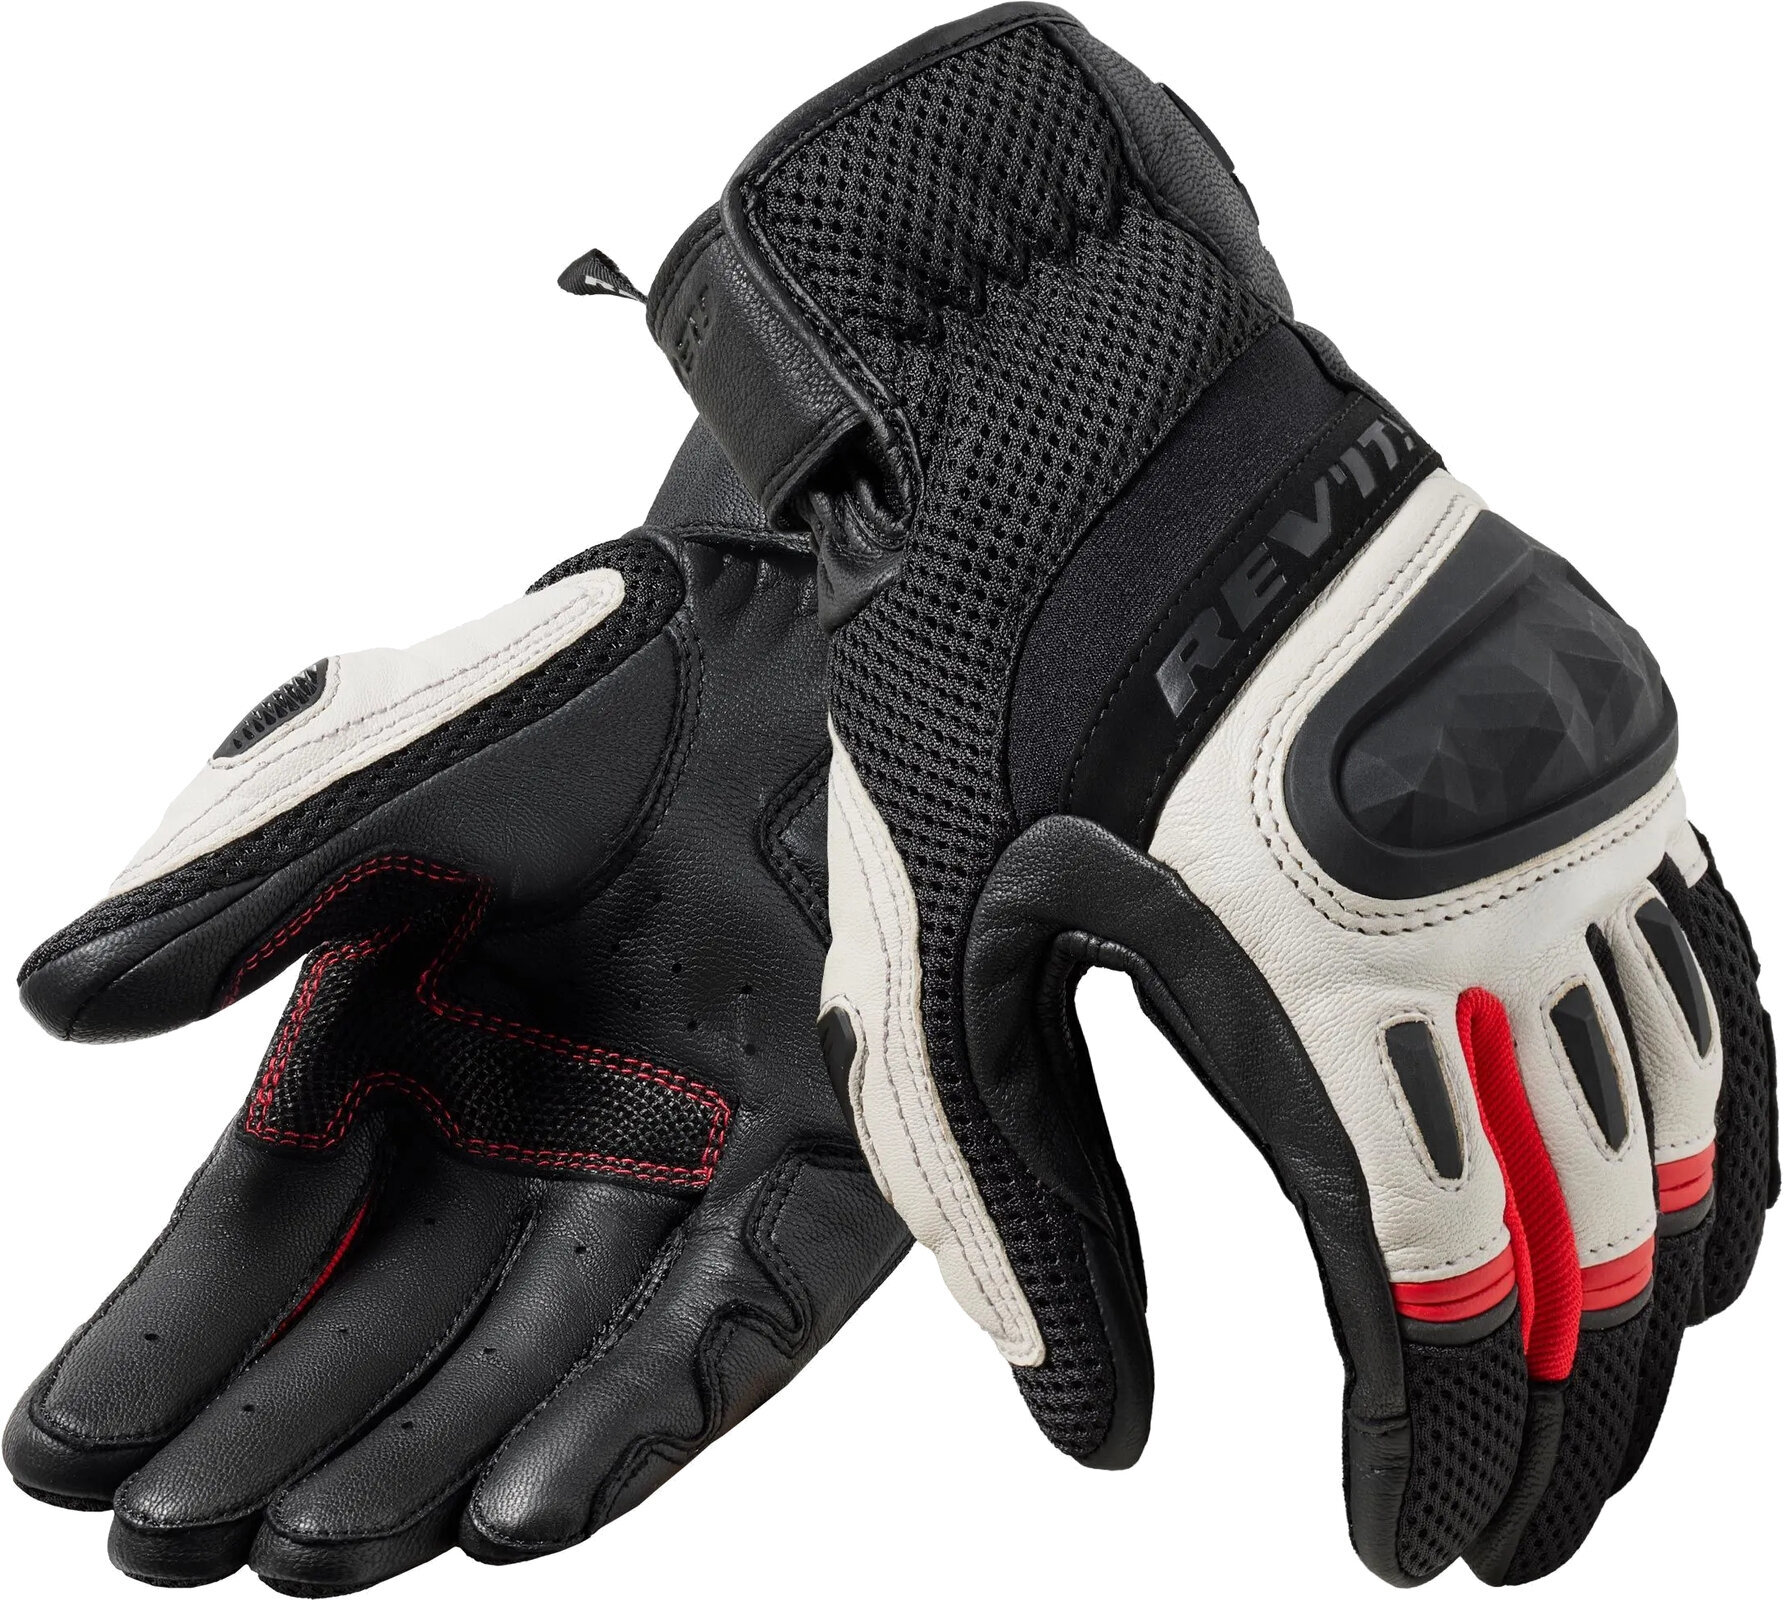 Motorcycle Gloves Rev'it! Gloves Dirt 4 Black/Red XL Motorcycle Gloves